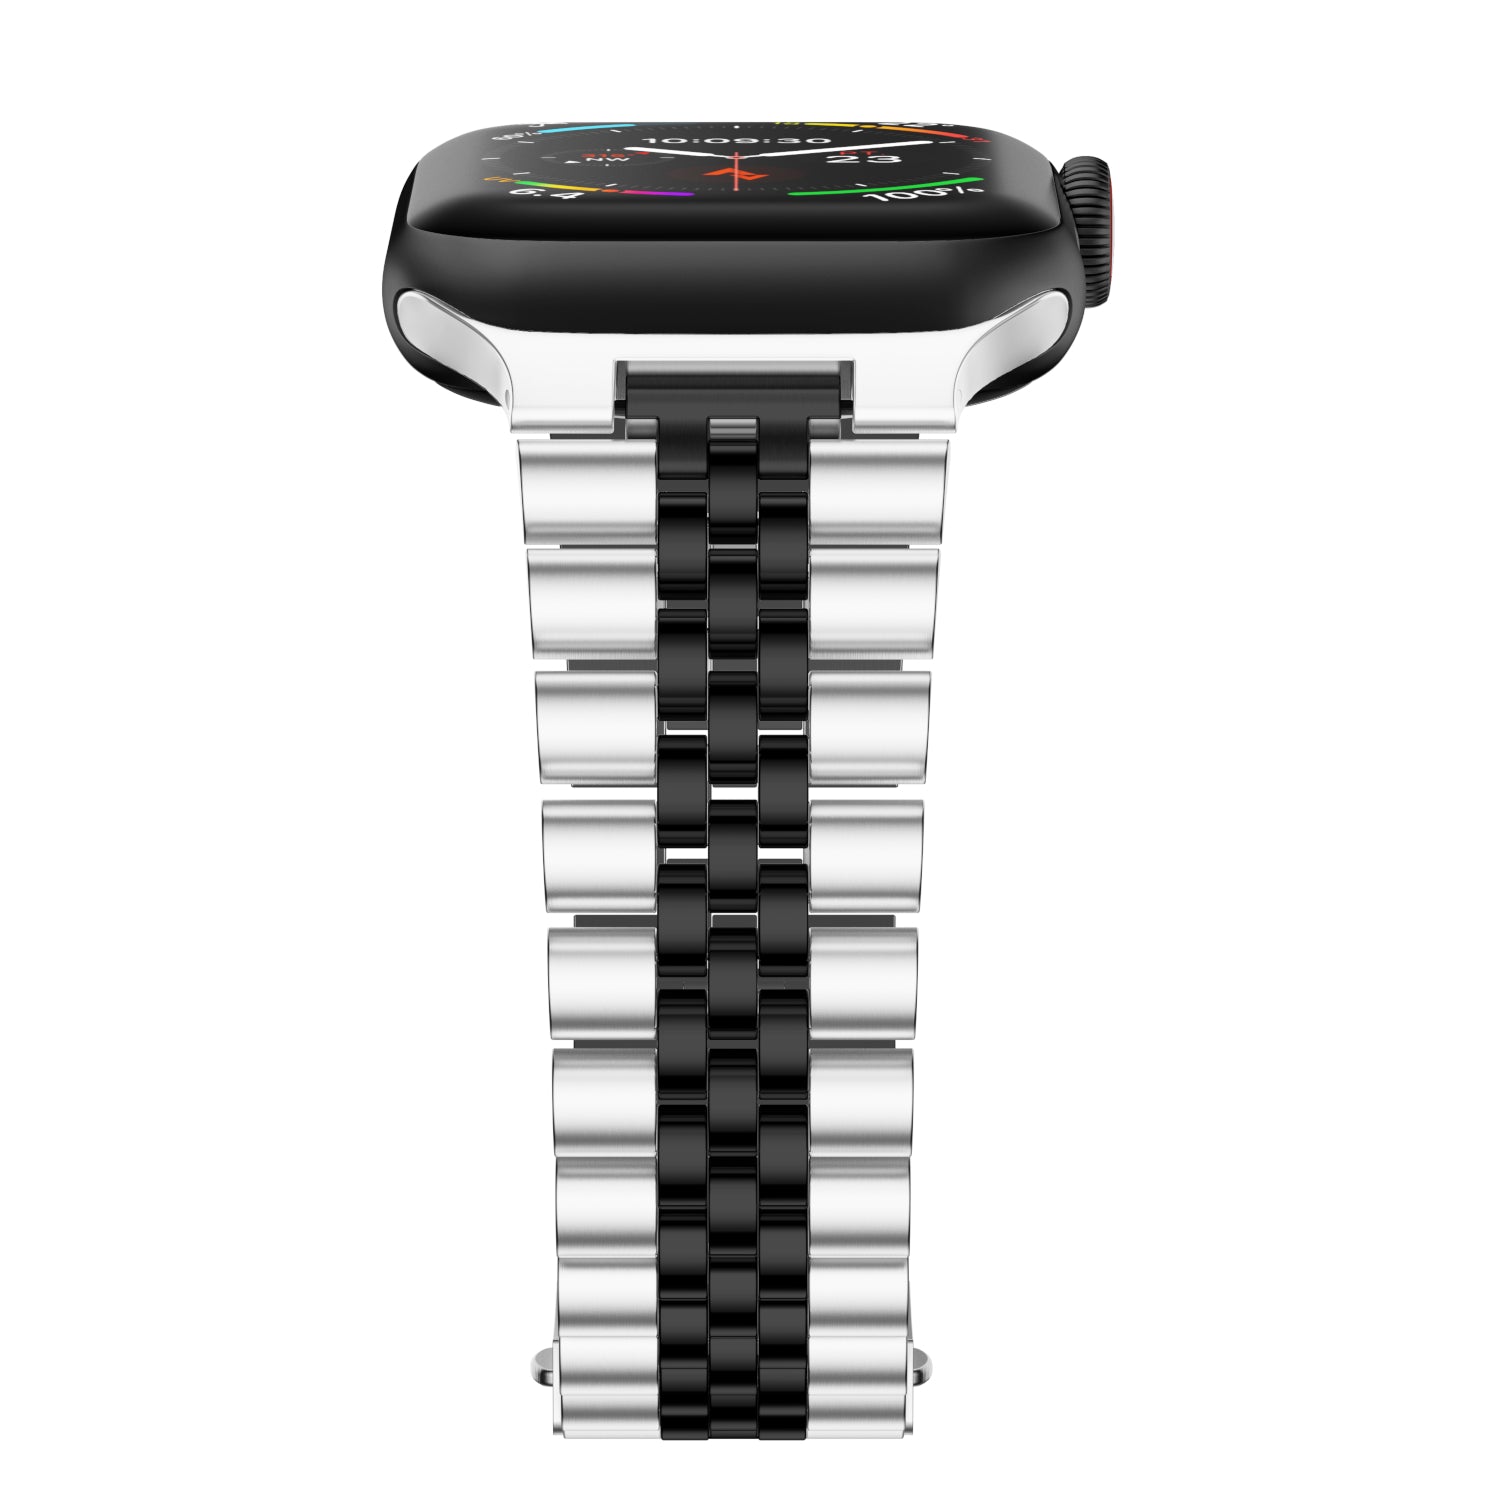 Stainless Steel Link Bracelet Band - The Perth in Silver and Black - Compatible with Apple Watch Size 42mm to 45mm - Friendie Pty Ltd